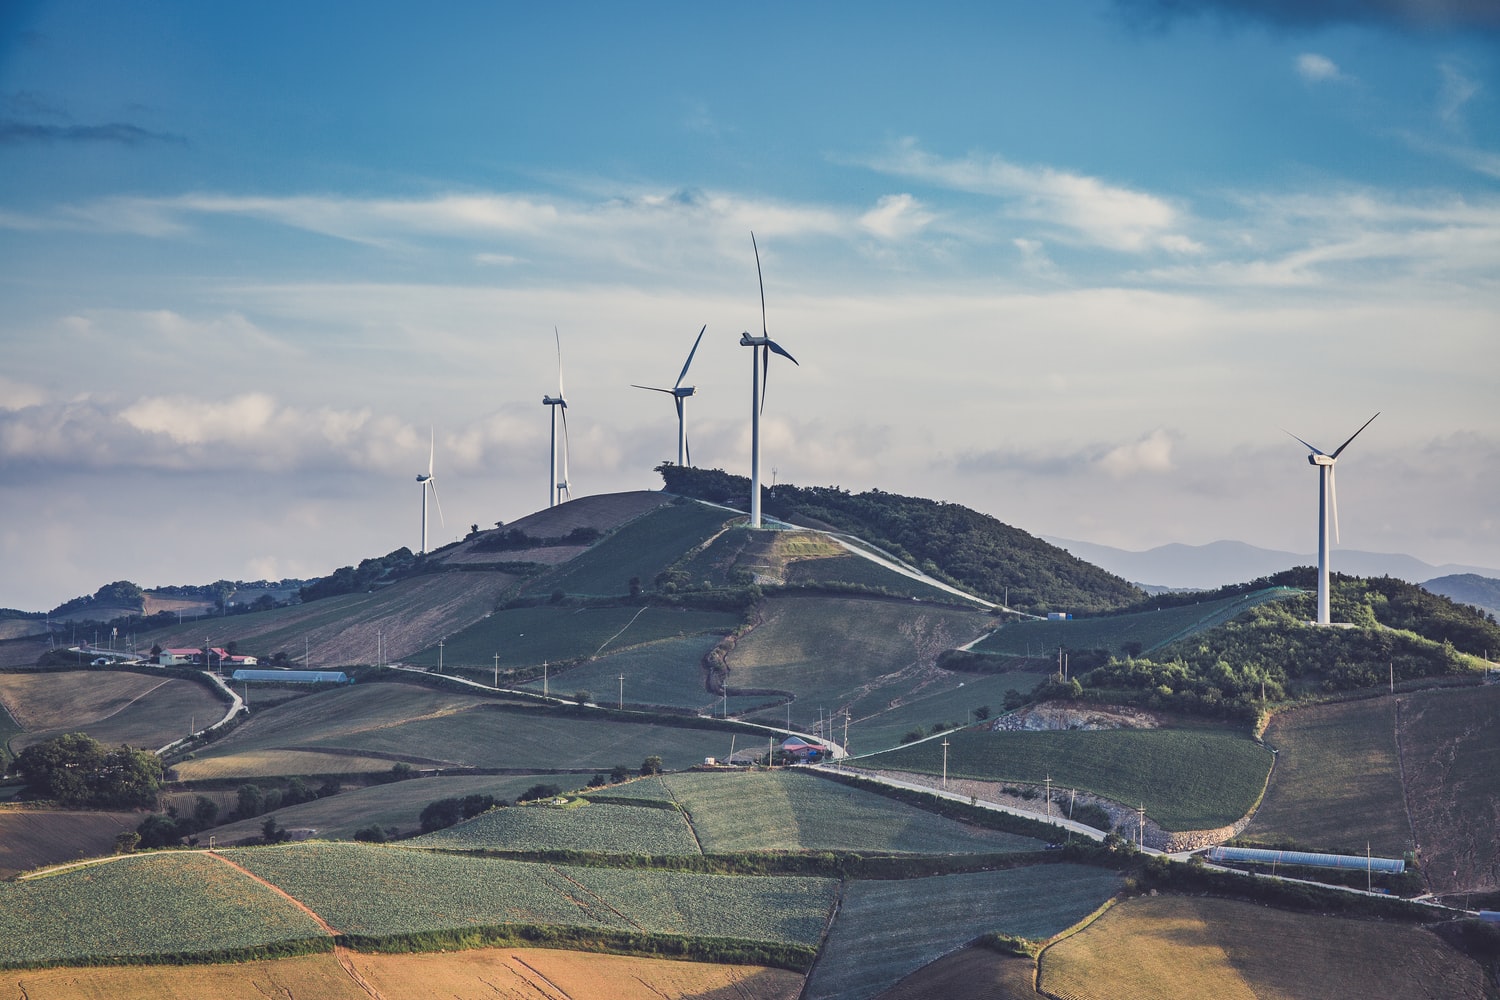 A photo of wind turbines on a green hilly lanscape, against a blue sky.